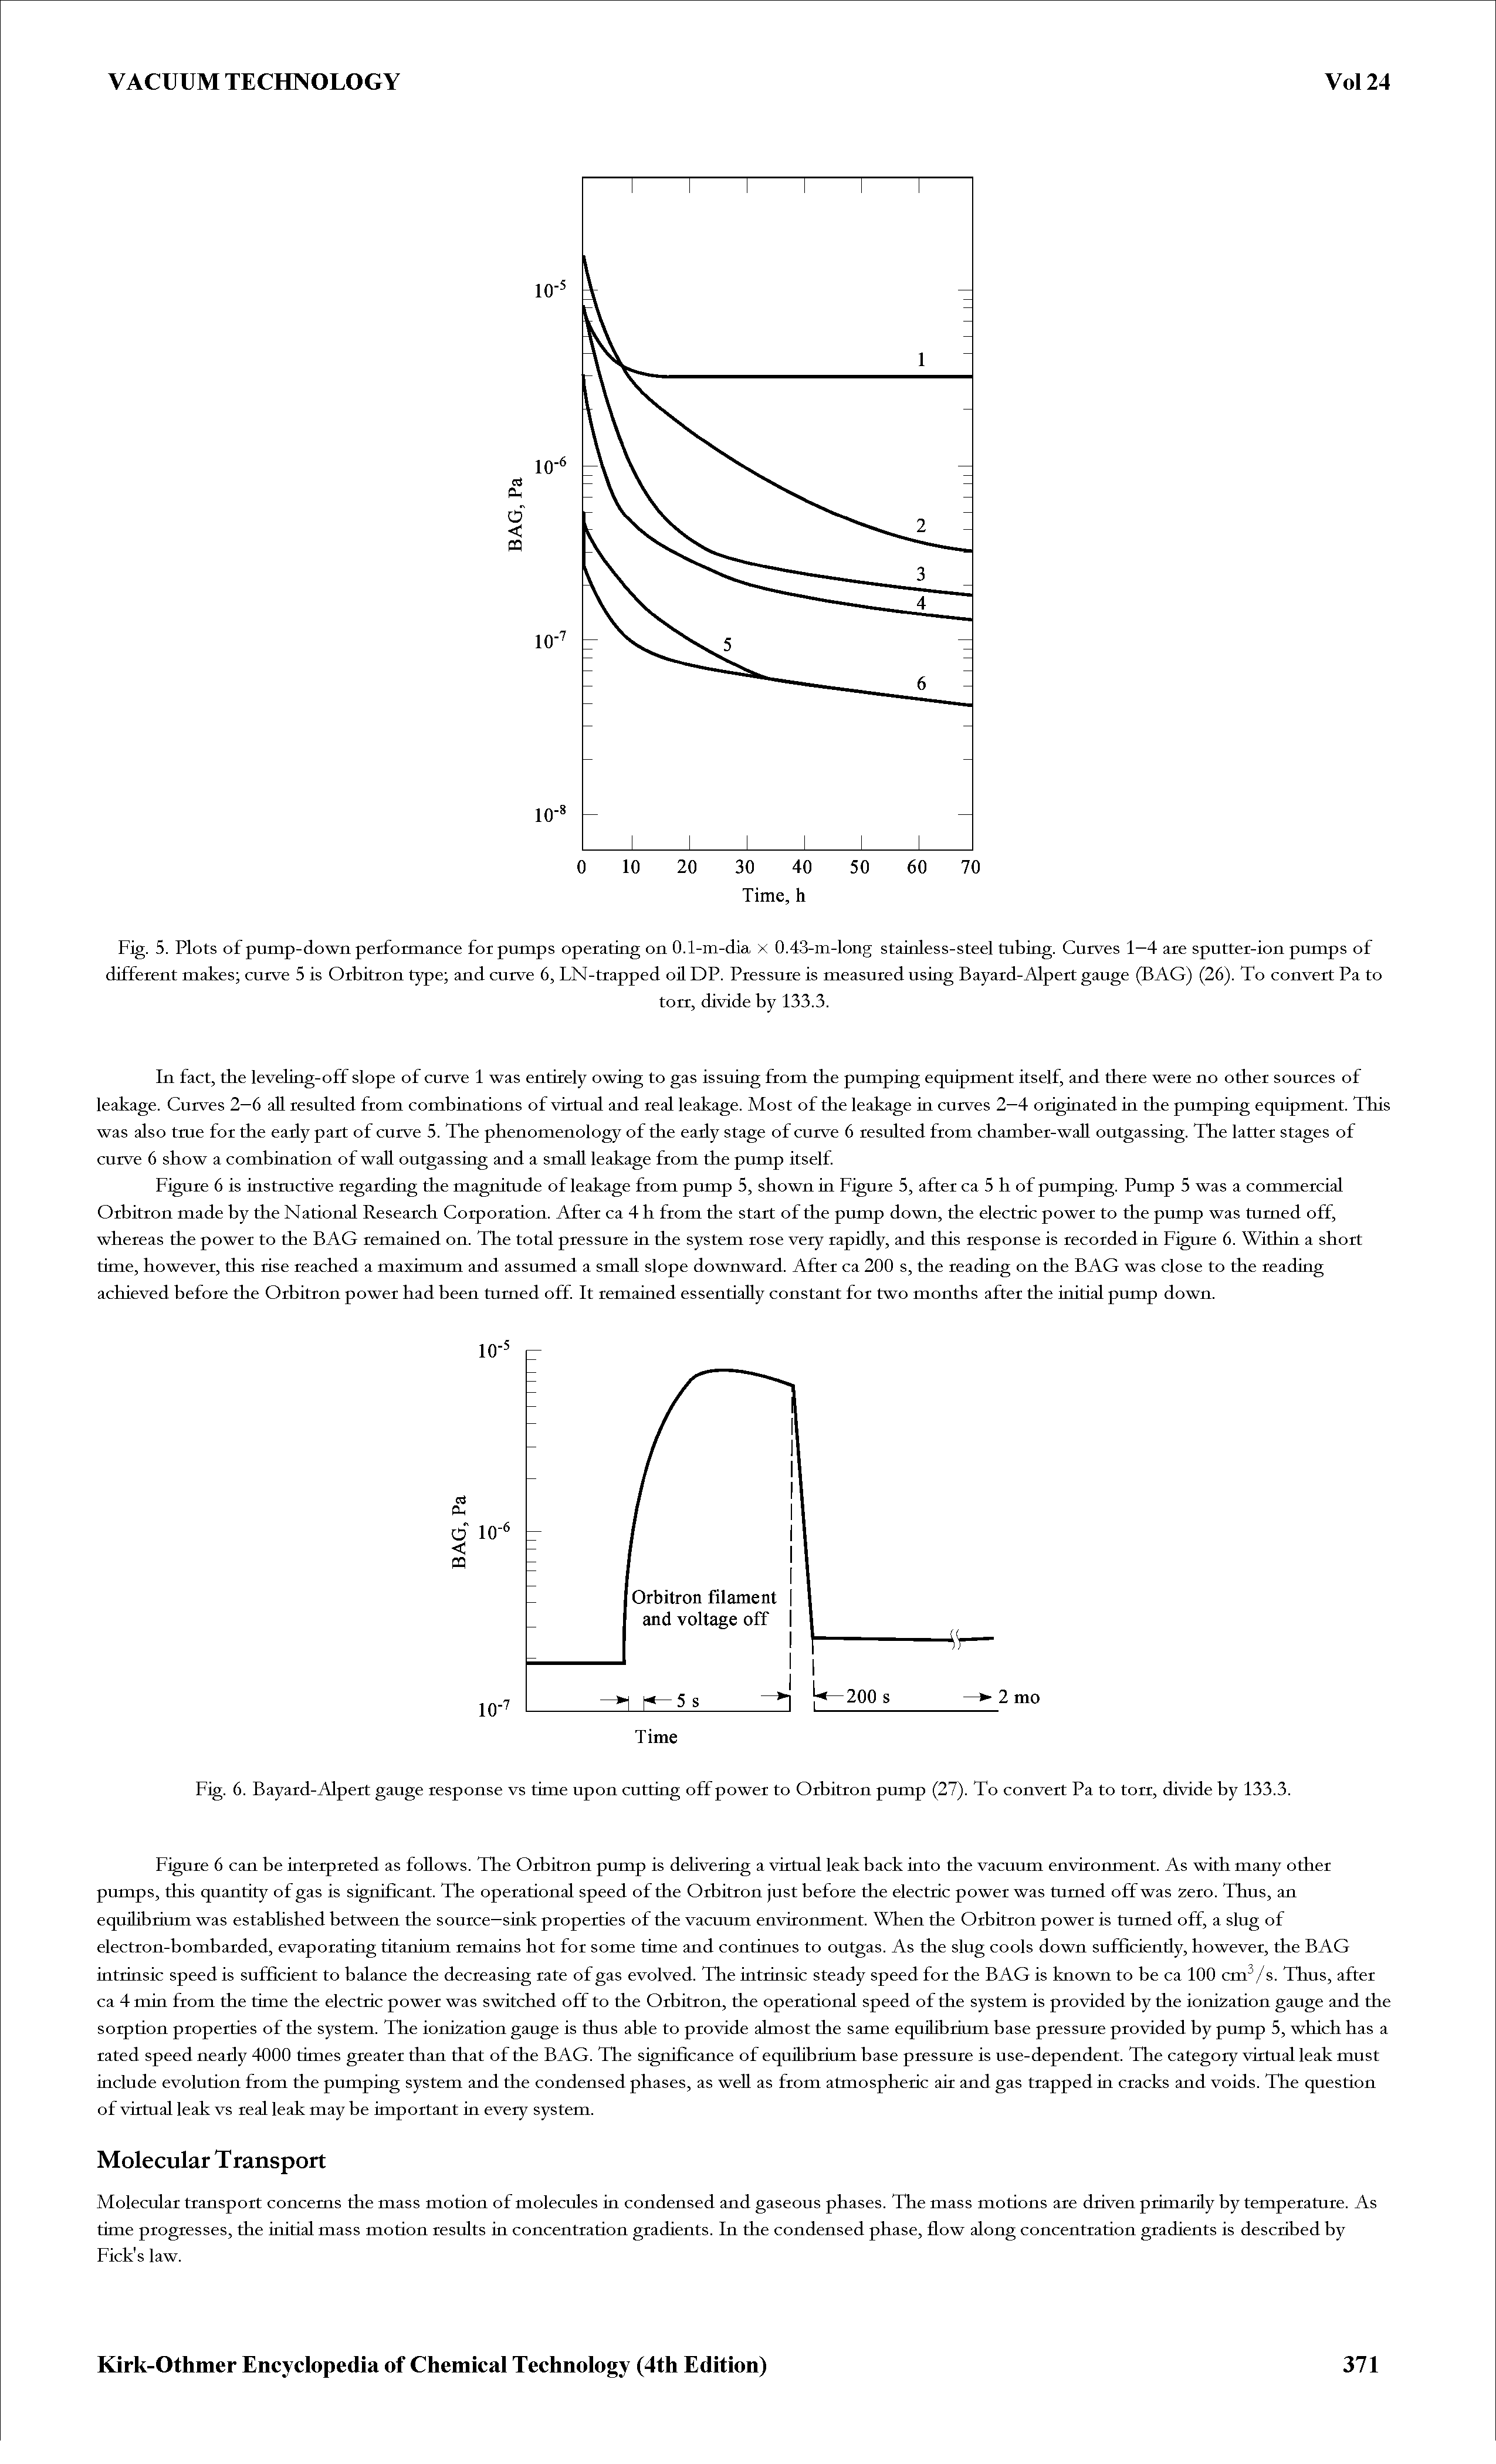 Figure 6 is iastmctive regarding the magnitude of leakage from pump 5, shown ia Figure 5, after ca 5 h of pumpiag. Pump 5 was a commercial Orbitron made by the National Research Corporation. After ca 4 h from the start of the pump down, the electric power to the pump was turned off, whereas the power to the BAG remained on. The total pressure ia the system rose very rapidly, and this response is recorded ia Figure 6. Within a short time, however, this rise reached a maximum and assumed a small slope downward. After ca 200 s, the reading on the BAG was close to the reading achieved before the Orbitron power had been turned off. It remained essentially constant for two months after the initial pump down.